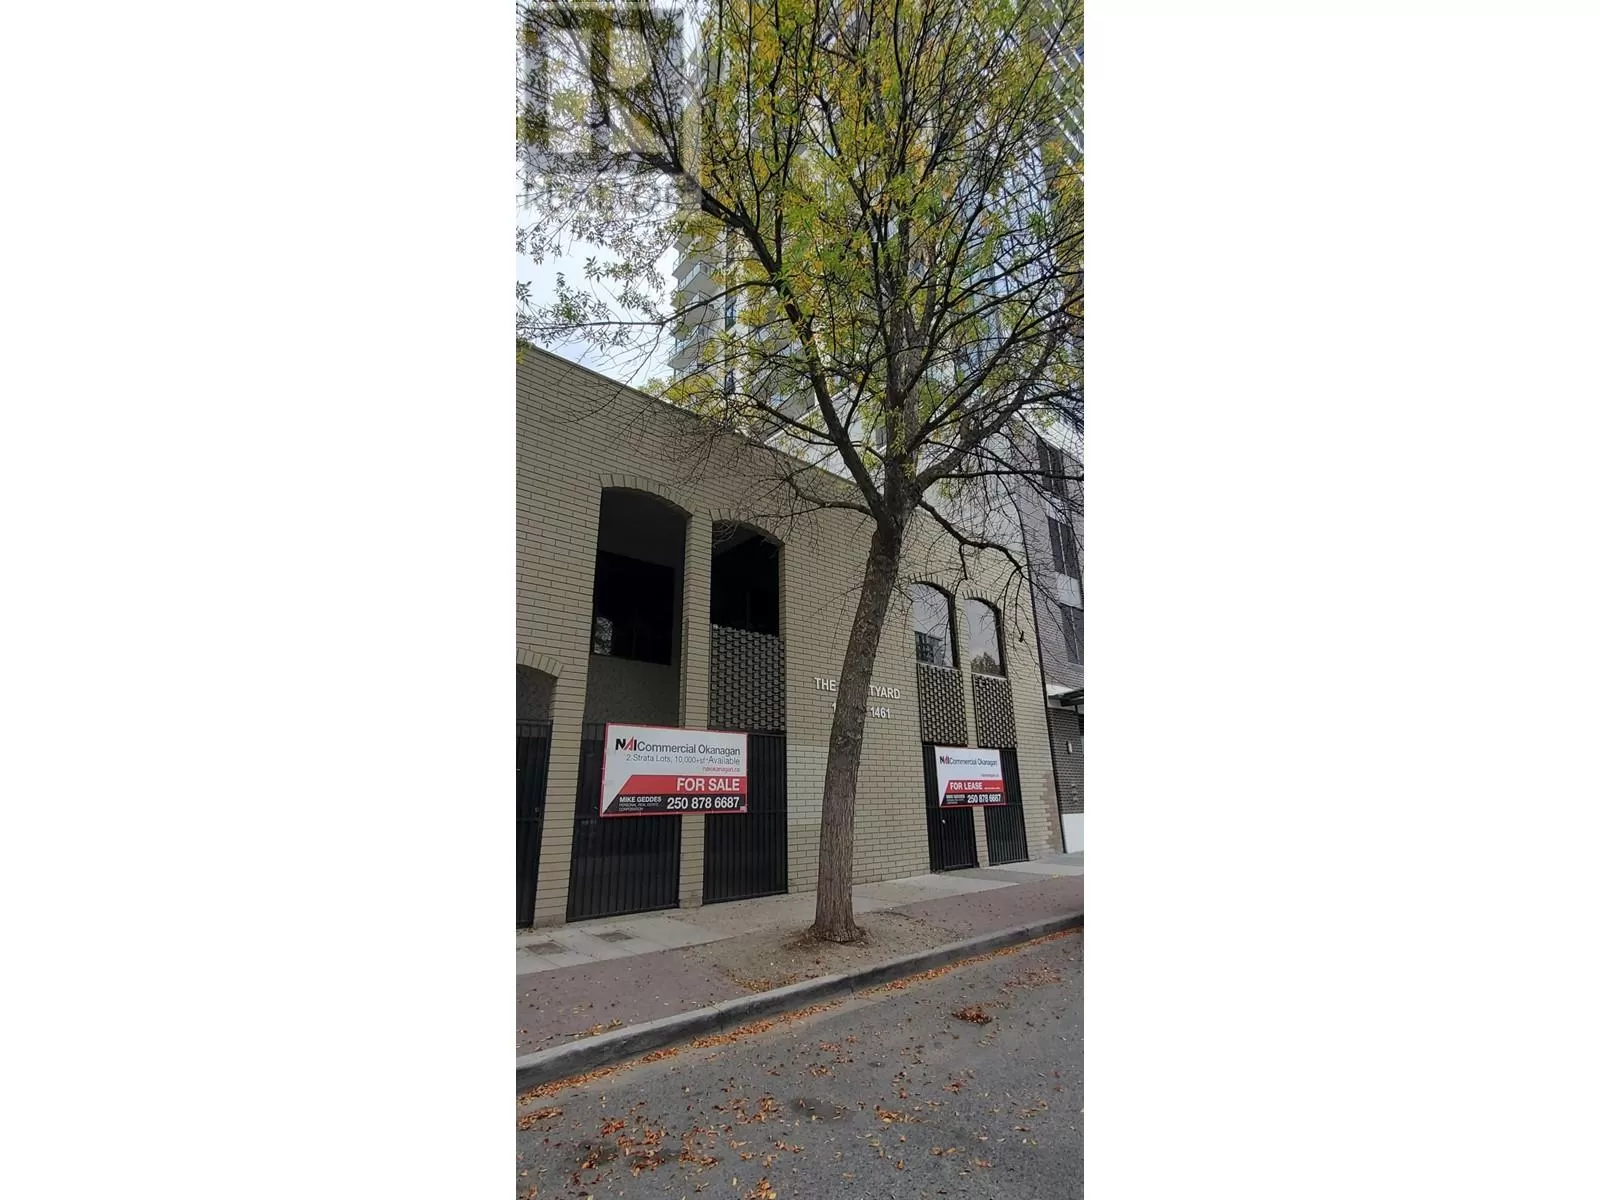 Offices for rent: 1461 St. Paul Street Unit# 100&200, Kelowna, British Columbia V1Y 2E4